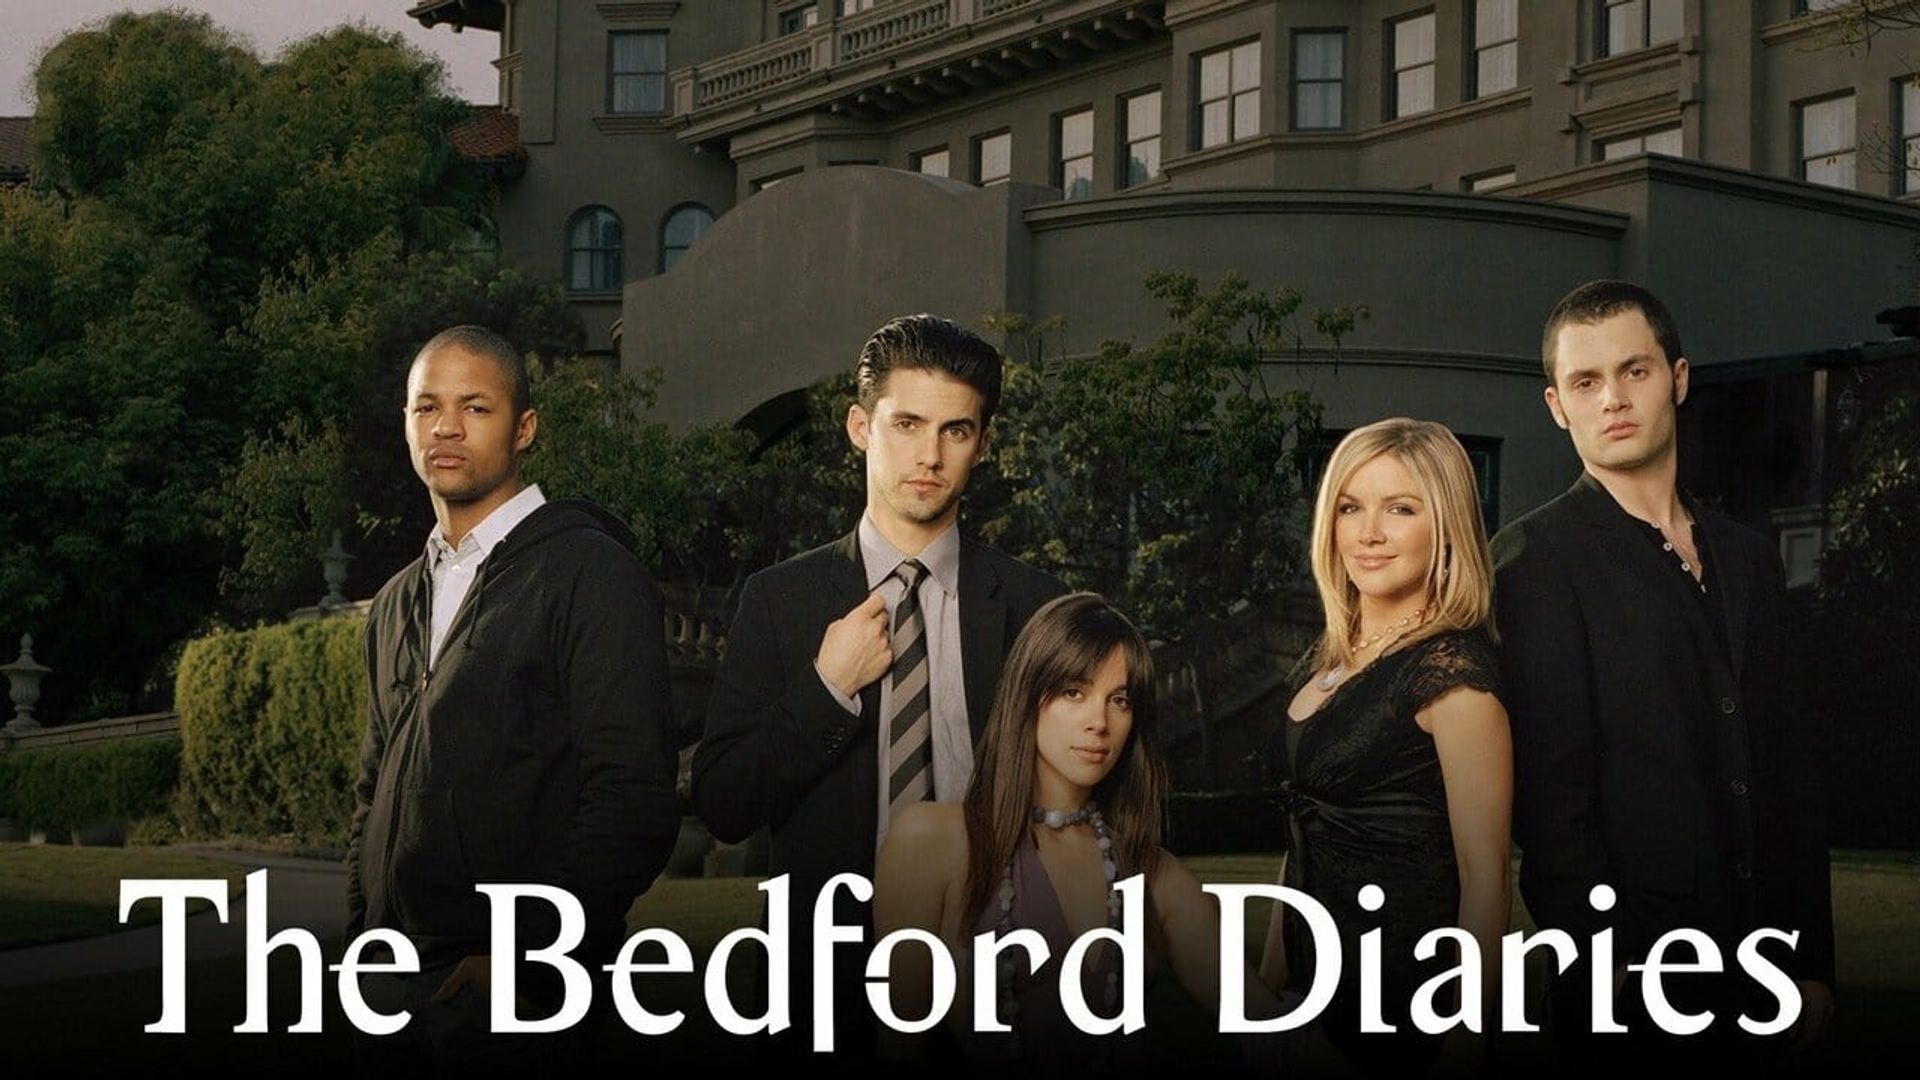 The Bedford Diaries background